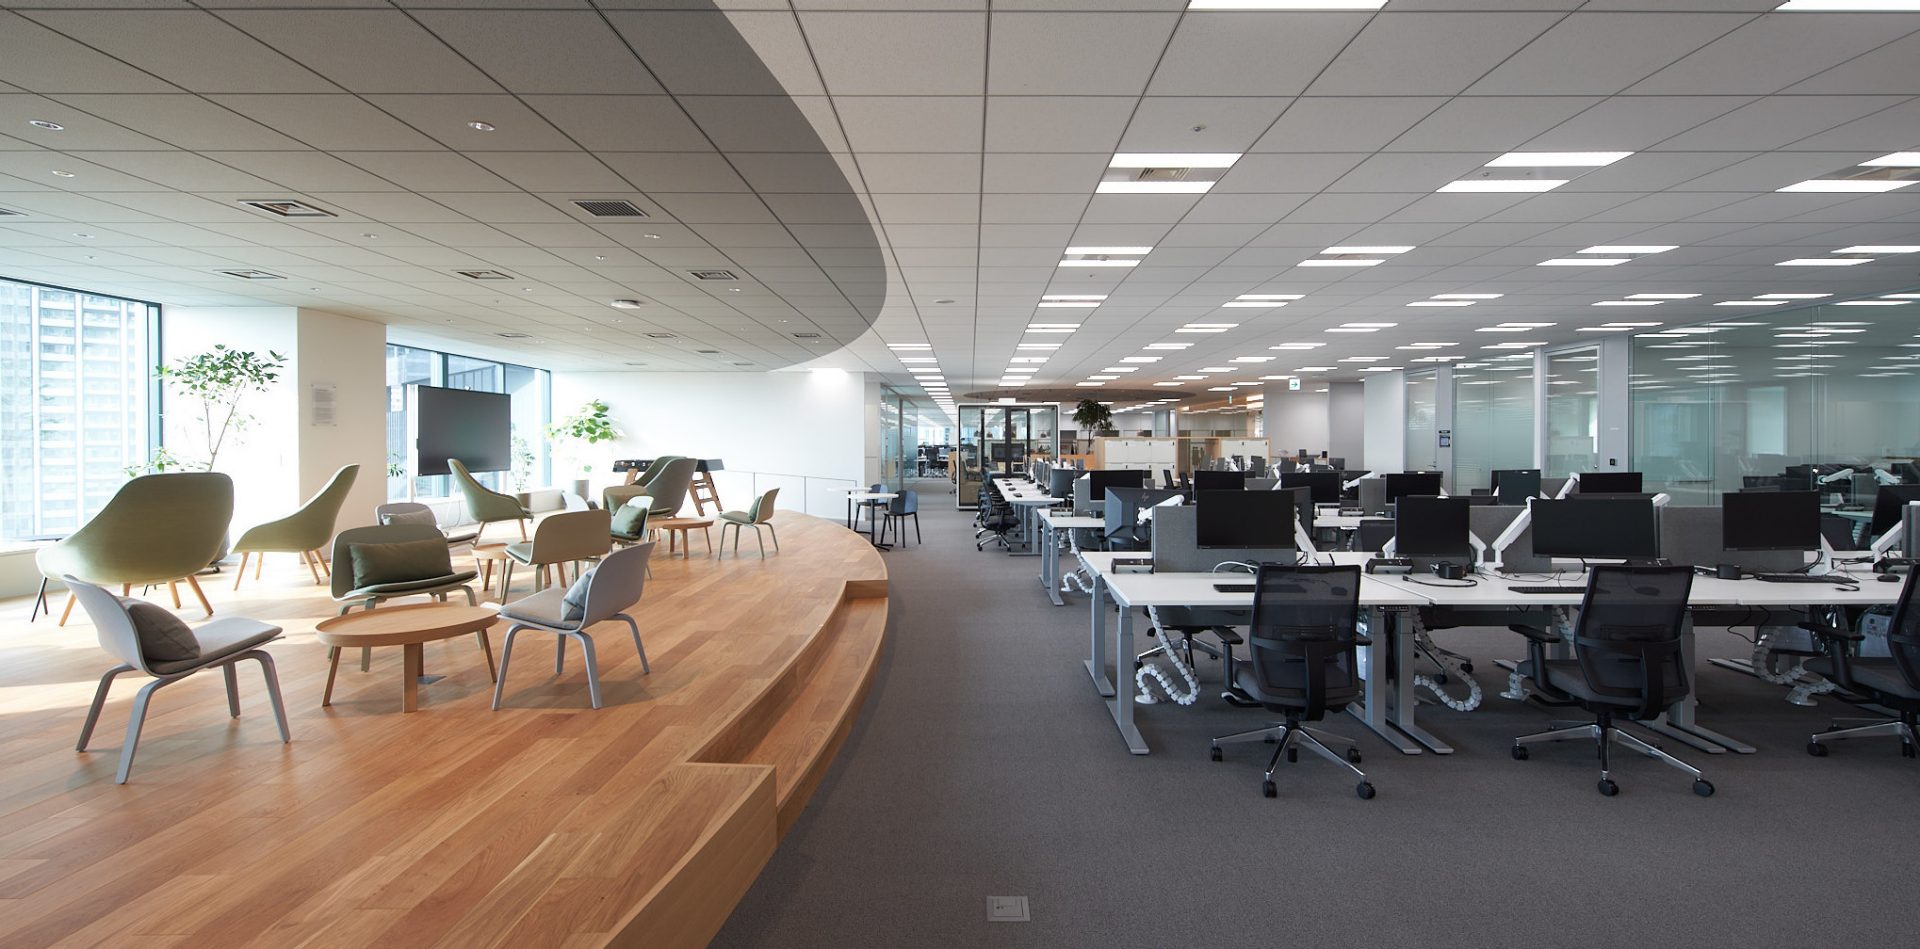 BMW Group Japan working space.